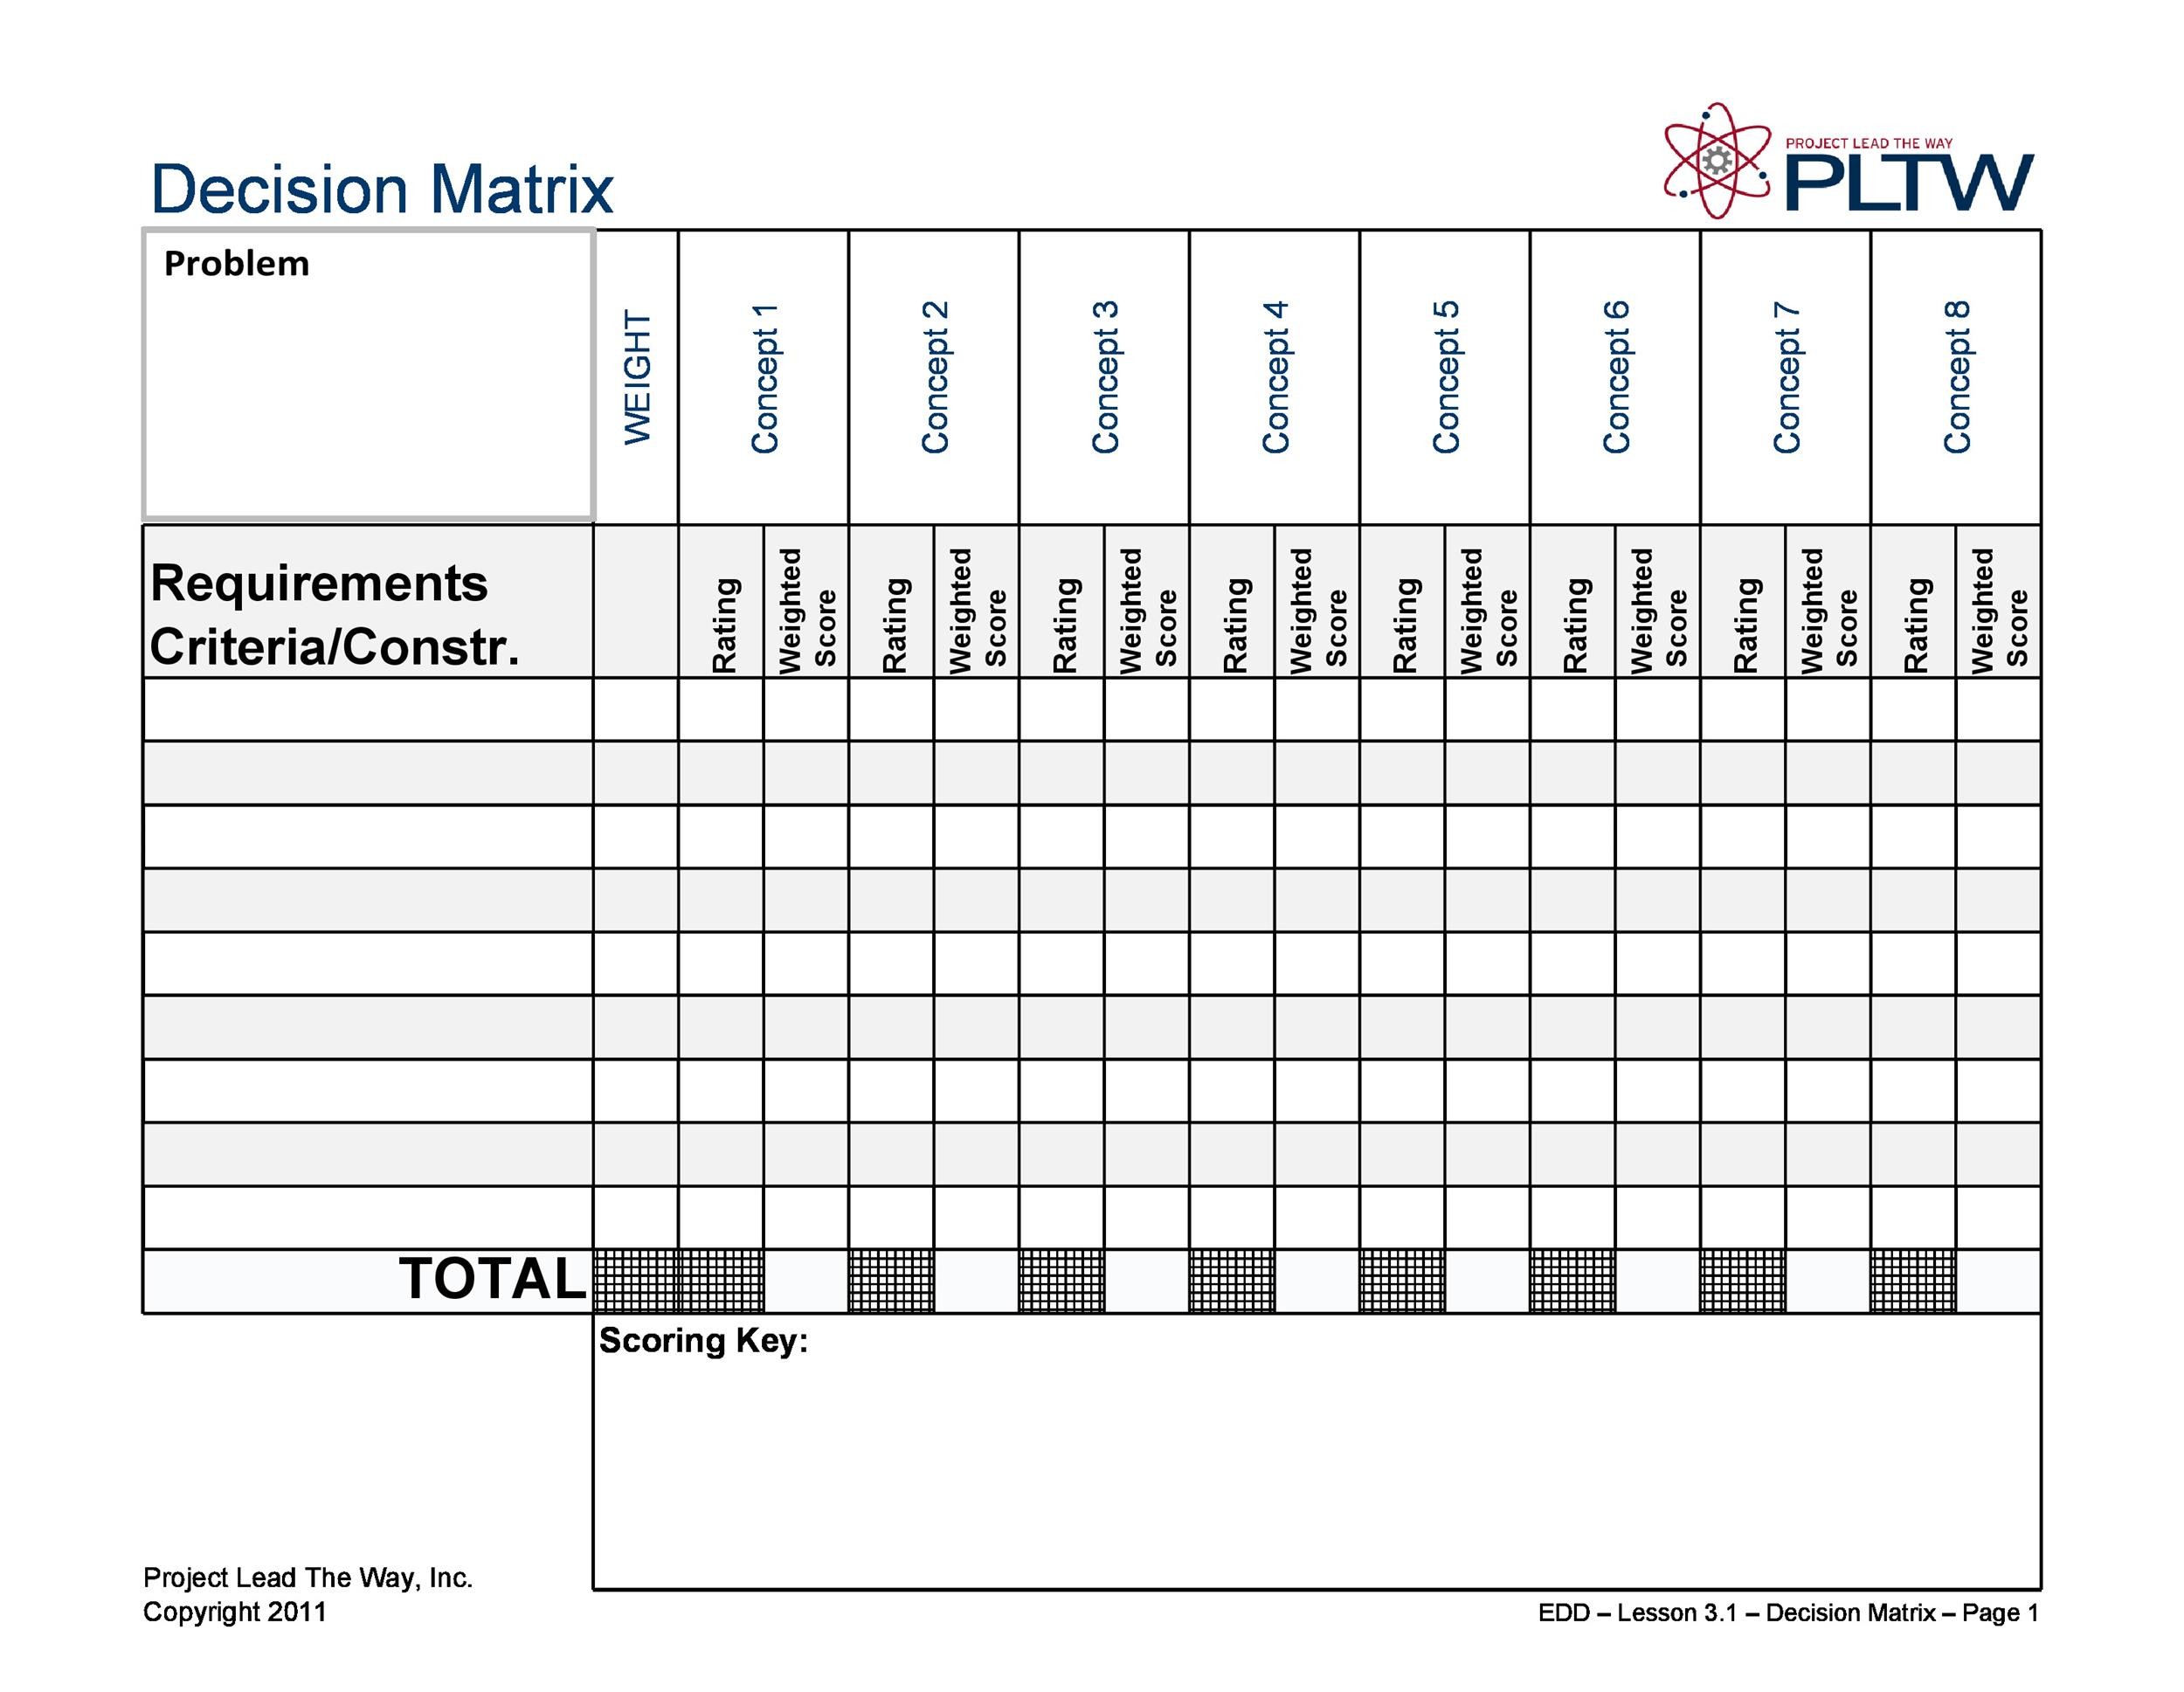 decision-matrix-template-excel-tutore-org-master-of-documents-my-xxx